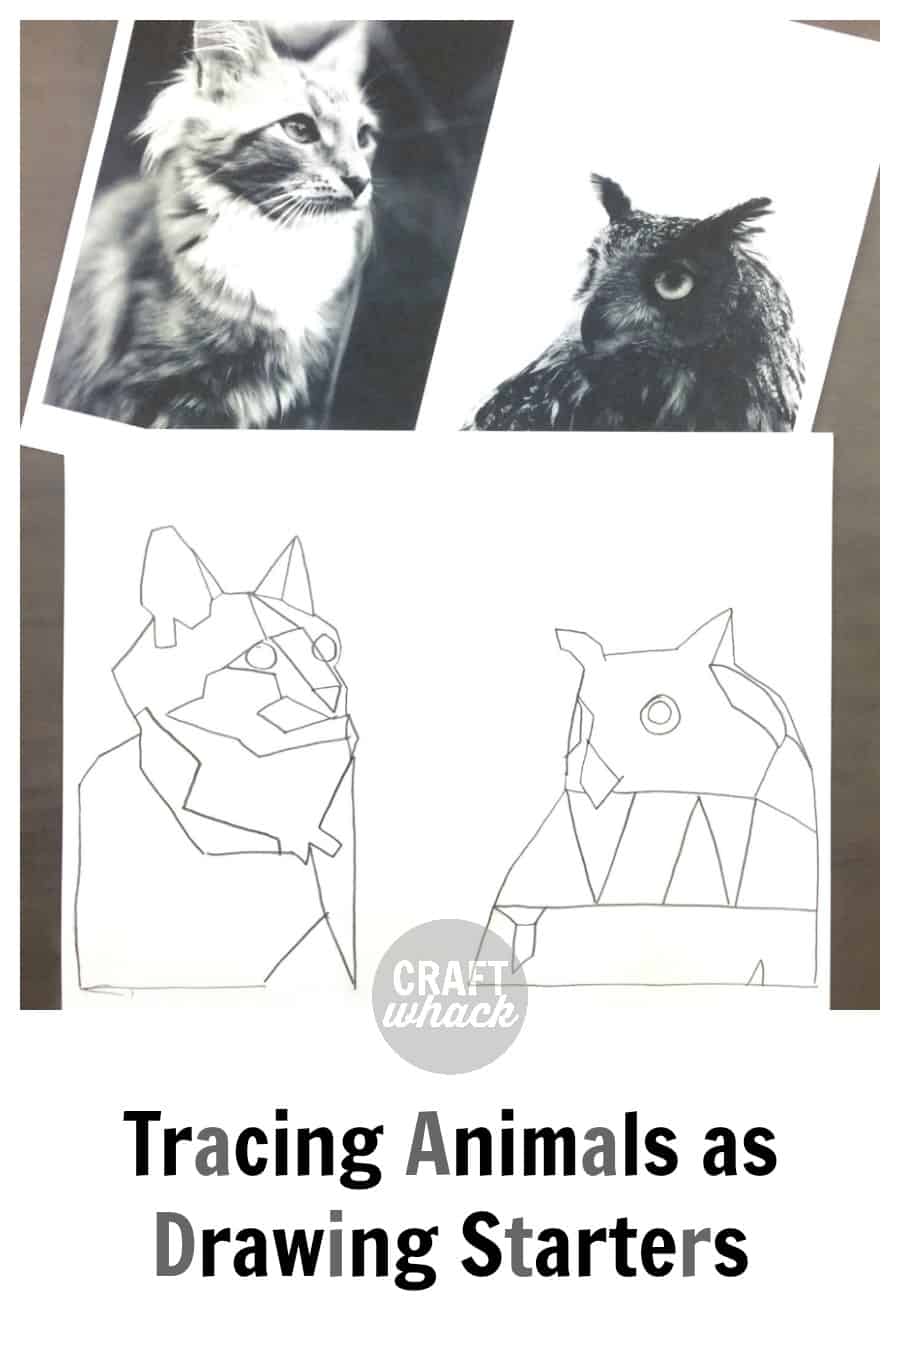 owl and cat tracings that are being used as drawing starters